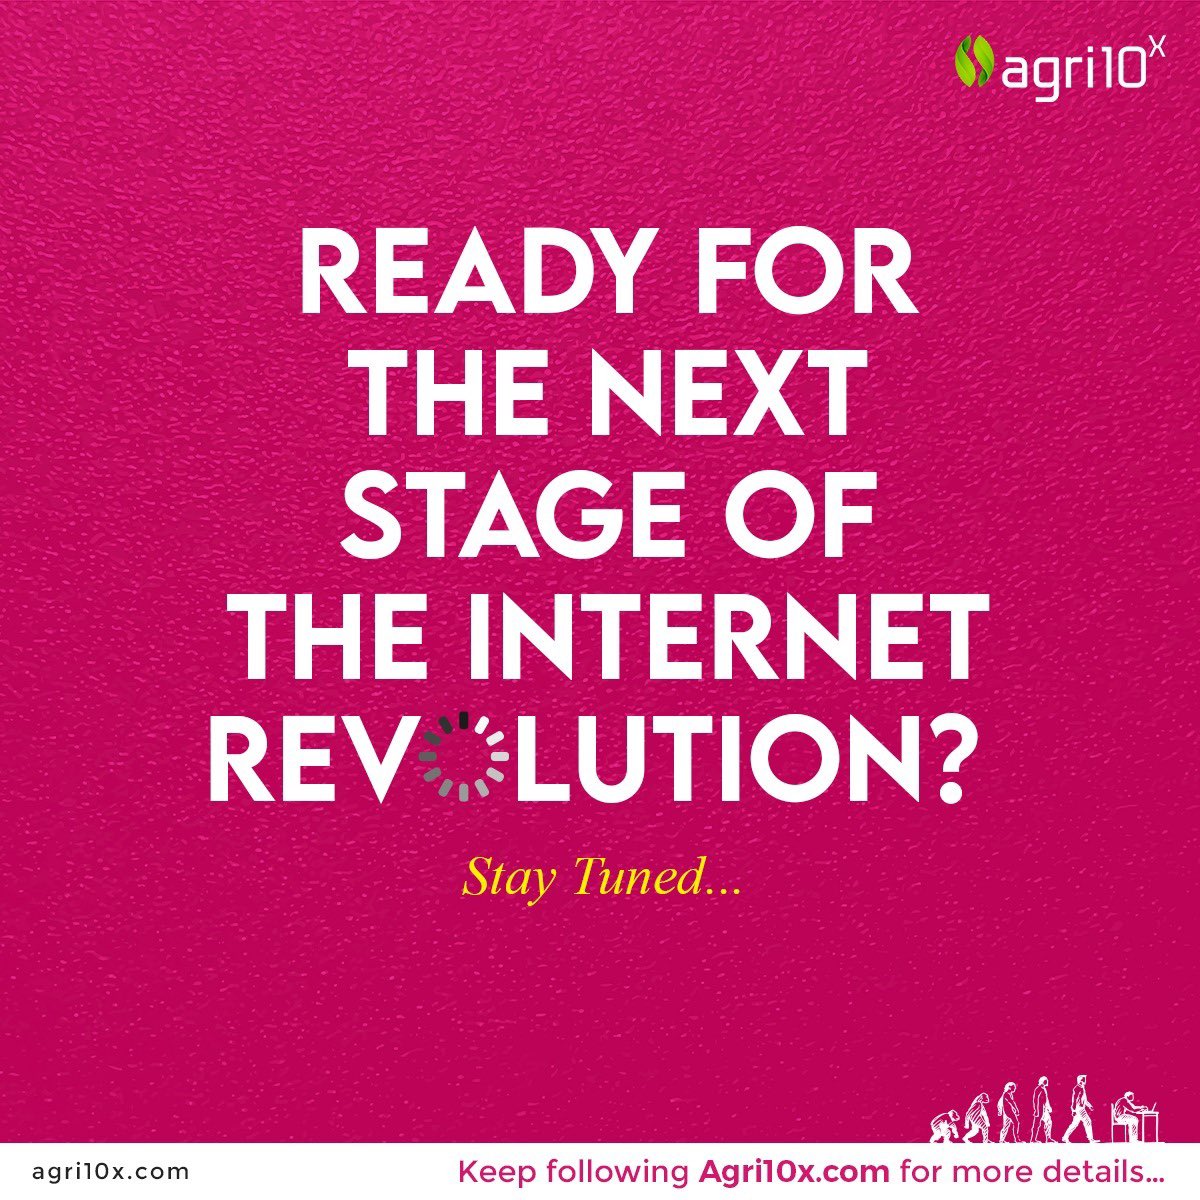 Are you curious to know what the next stage of internet evolution has in store for us? Stay tuned to Agri10x to unveil the mystery! #Agri10x #Agritech #Evolution #Web #Future